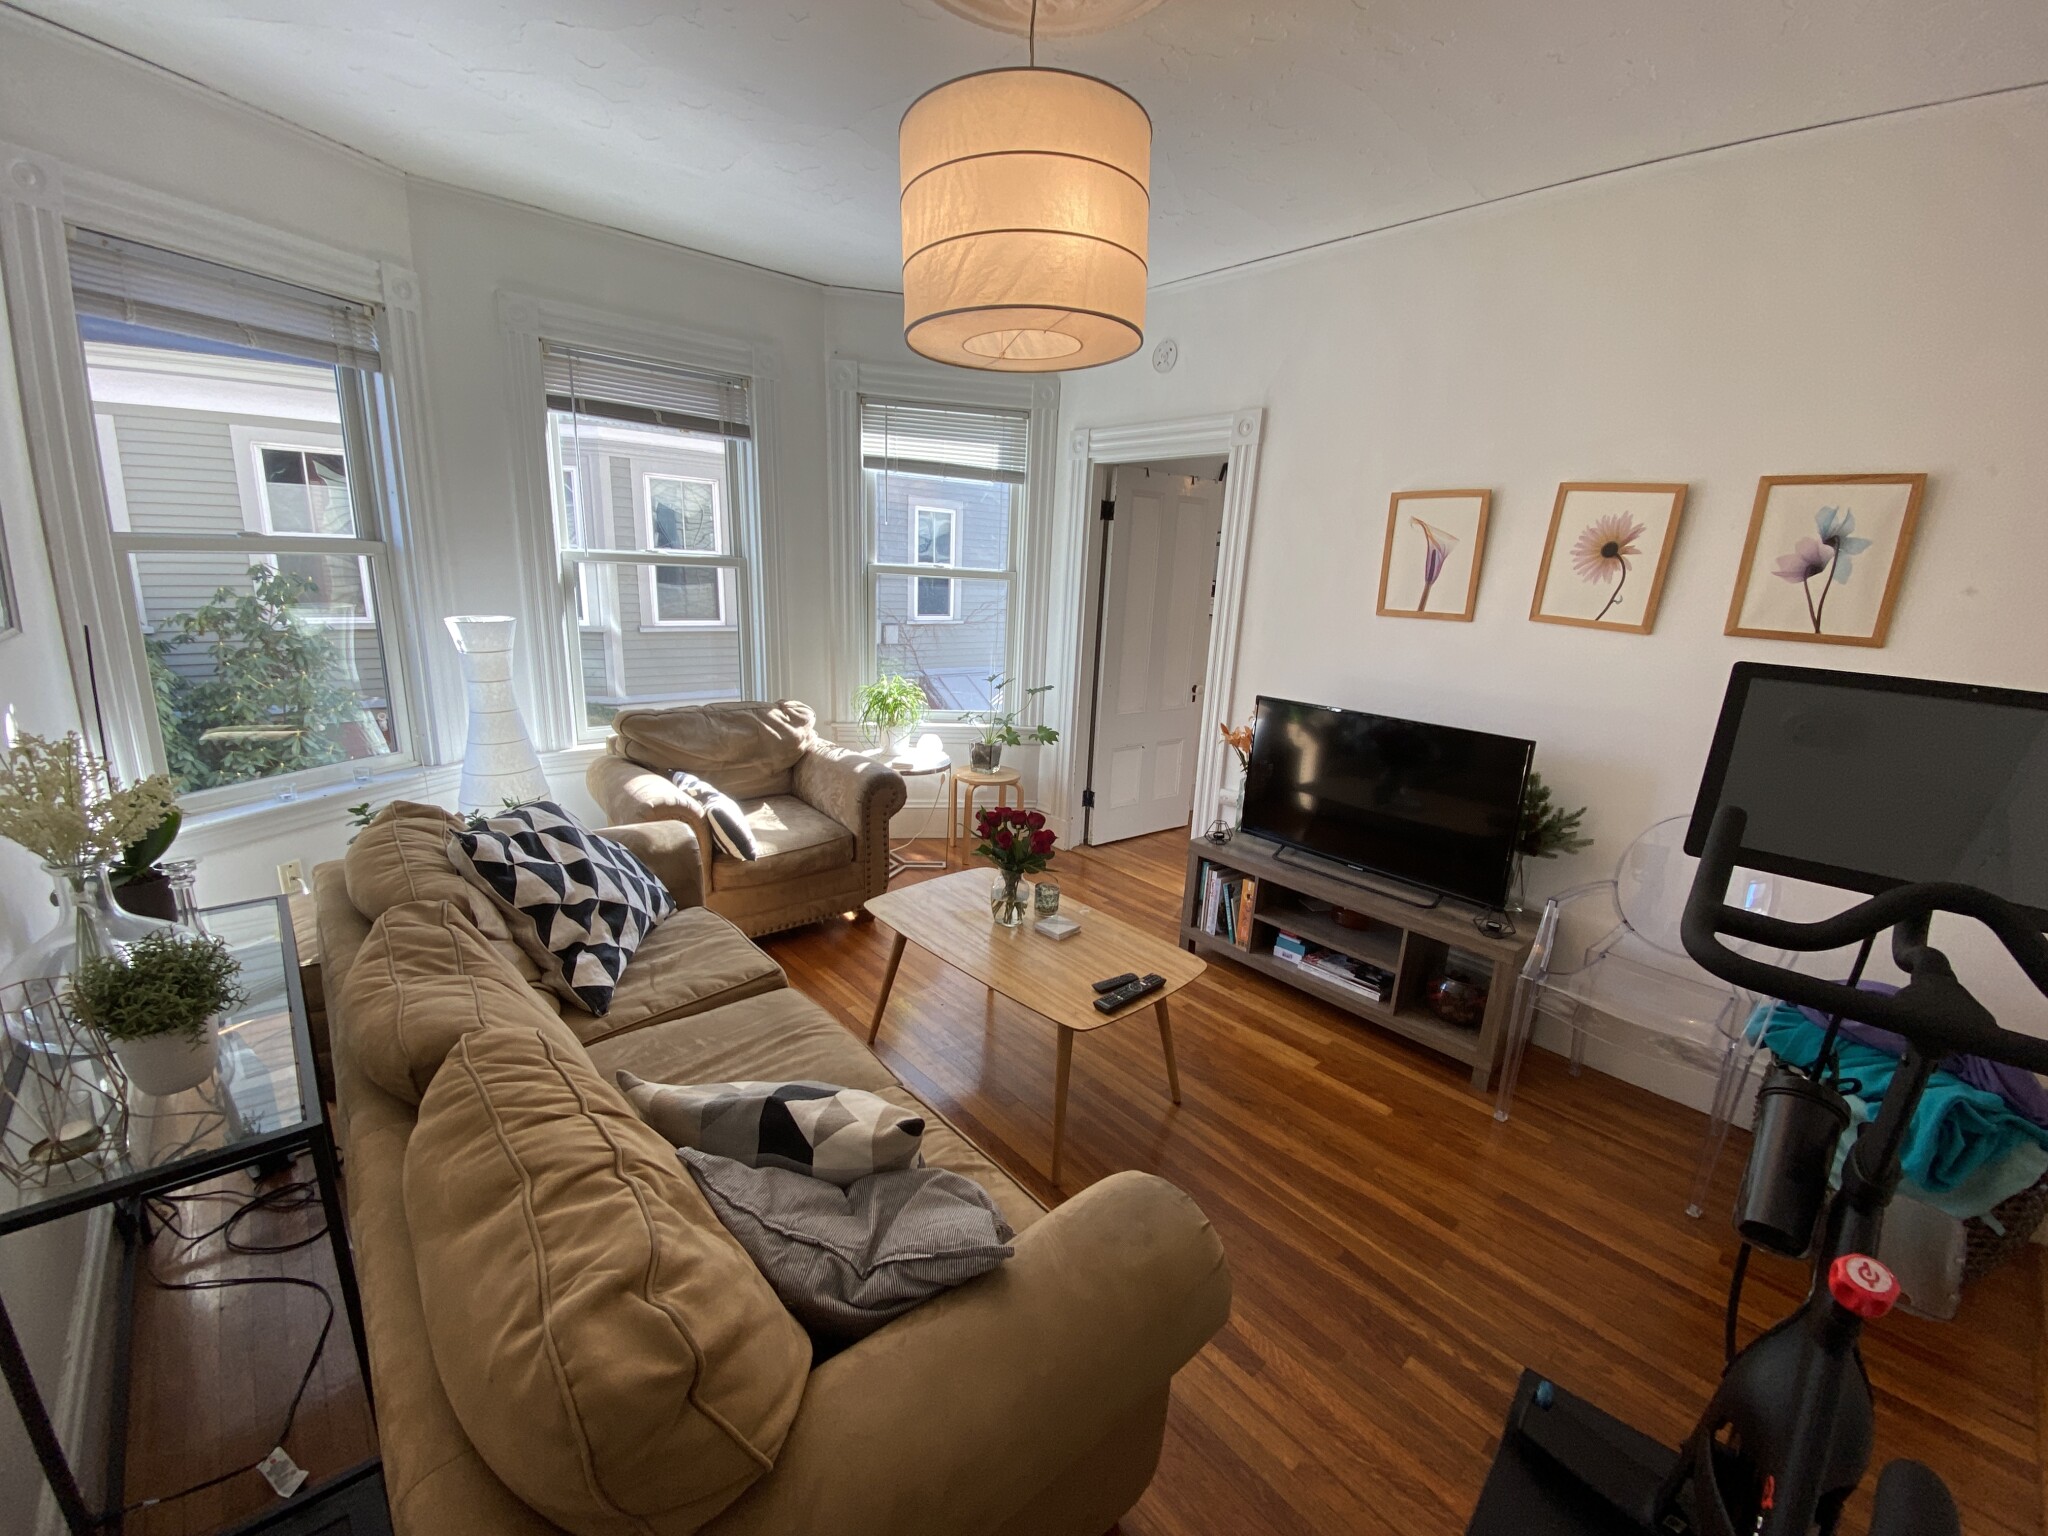 Photos of apartment on Orchard St.,Cambridge MA 02140